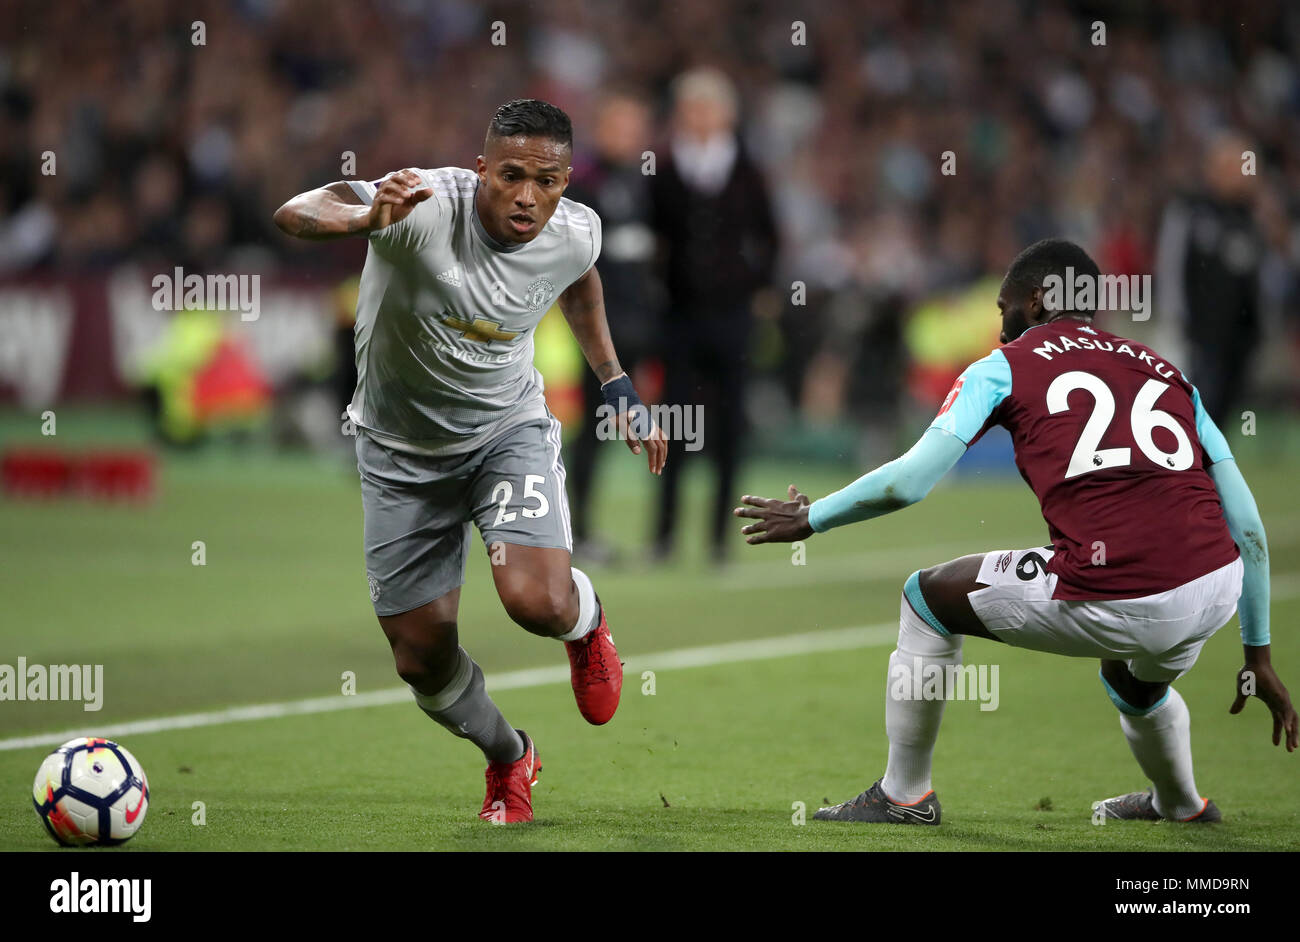 Manchester United's Antonio Valencia (left) during the Premier League match at London Stadium. PRESS ASSOCIATION Photo. Picture date: Thursday May 10, 2018. See PA story SOCCER West Ham. Photo credit should read: Nick Potts/PA Wire. RESTRICTIONS: EDITORIAL USE ONLY No use with unauthorised audio, video, data, fixture lists, club/league logos or 'live' services. Online in-match use limited to 75 images, no video emulation. No use in betting, games or single club/league/player publications. Stock Photo